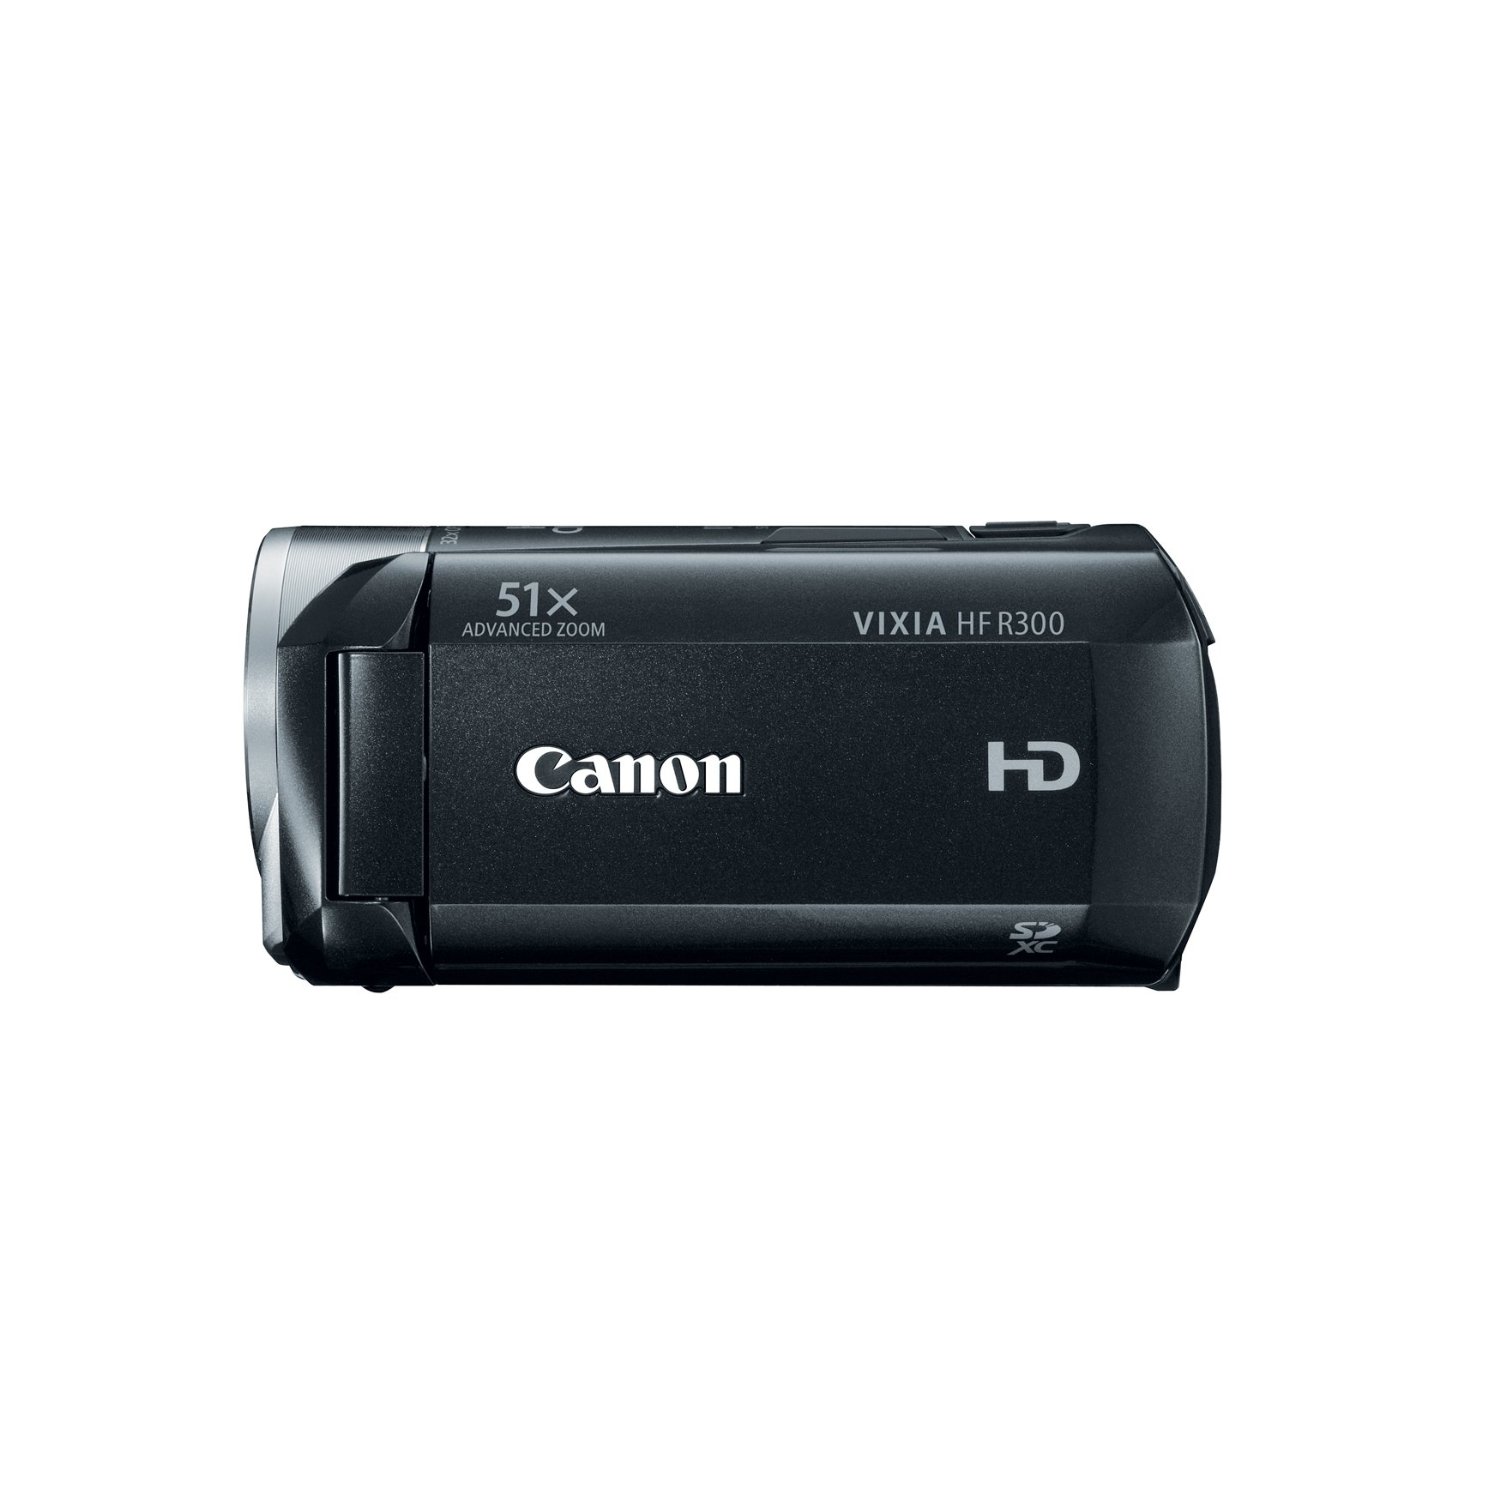 http://thetechjournal.com/wp-content/uploads/images/1202/1328098403-canon-vixia-hf-r300-full-hd-51x-image-stabilized-optical-zoom-camcorder-9.jpg